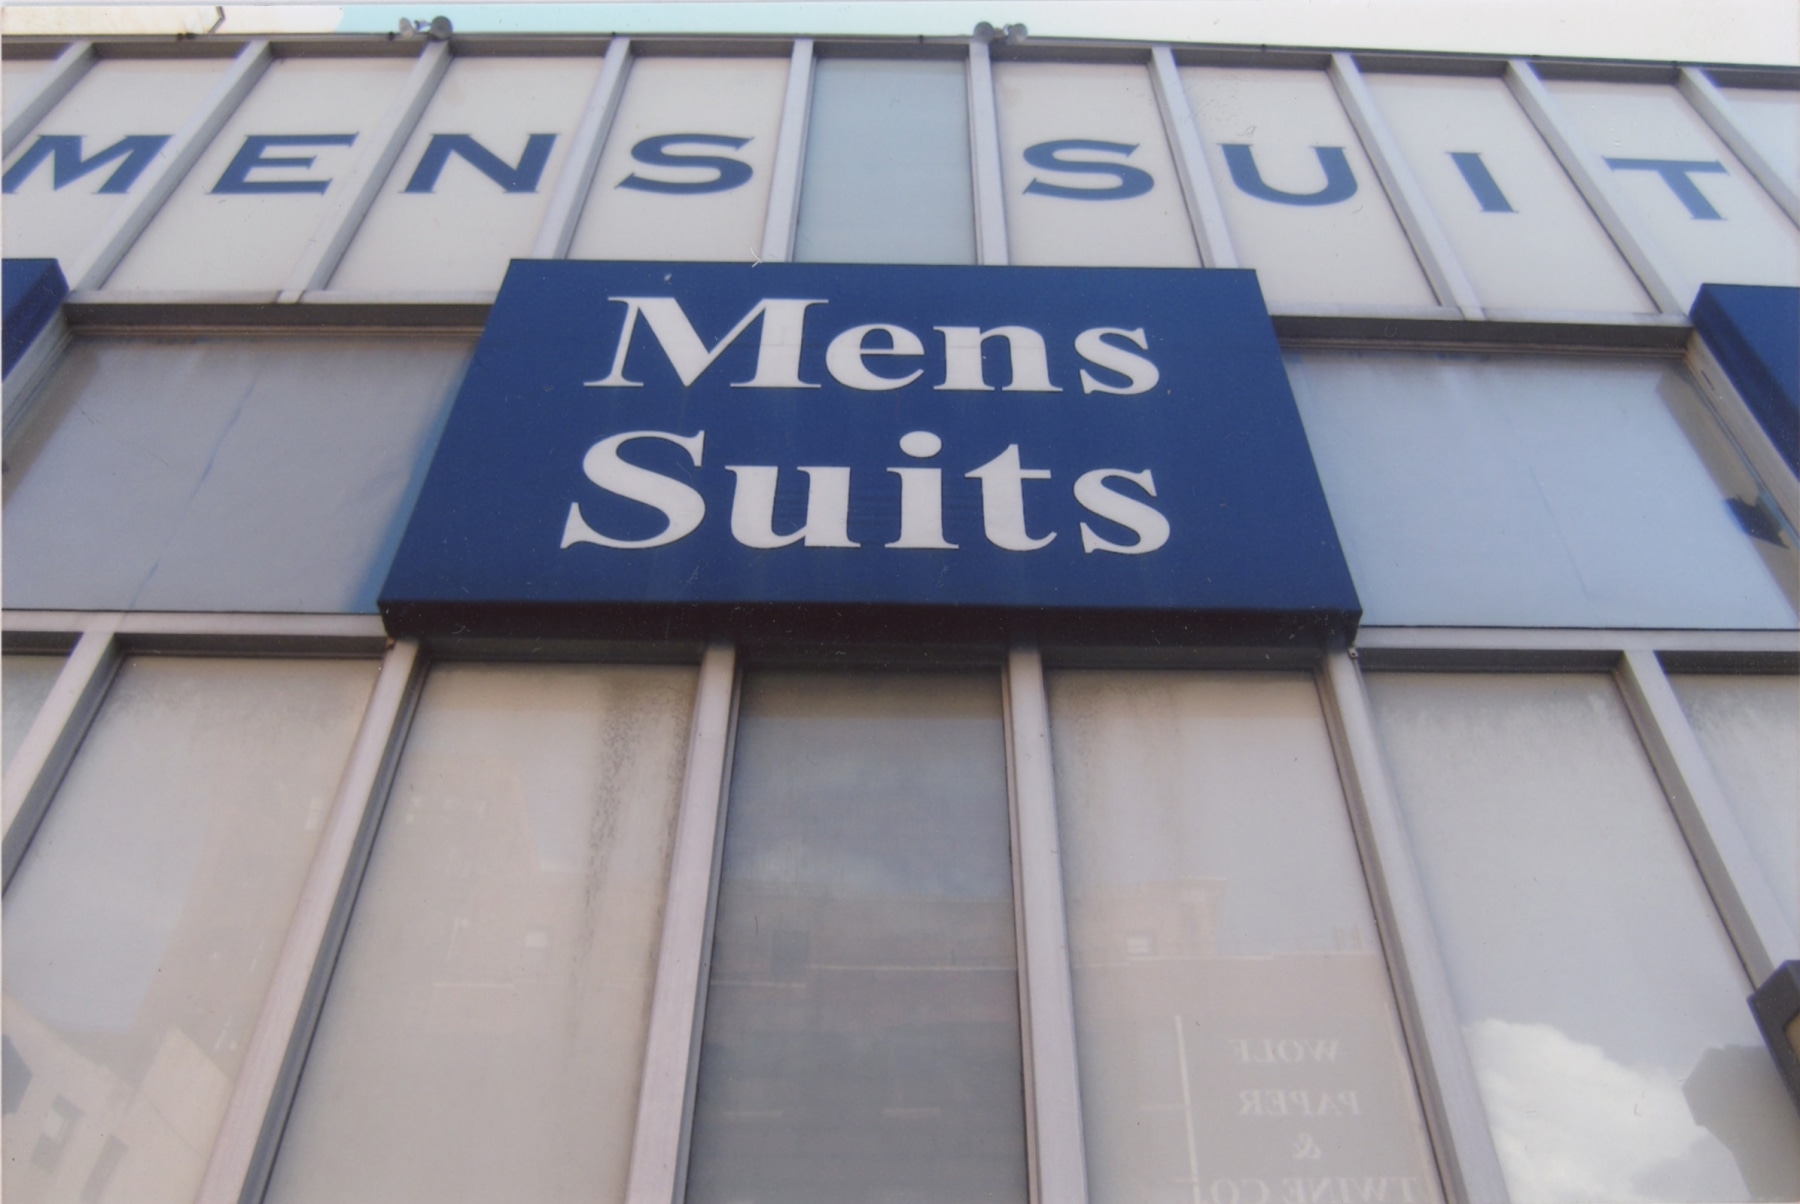 CHARLES LEDRAY: MENS SUITS - FROM THE RESEARCH DEPARTMENT - Viewing Room - From the Research Department